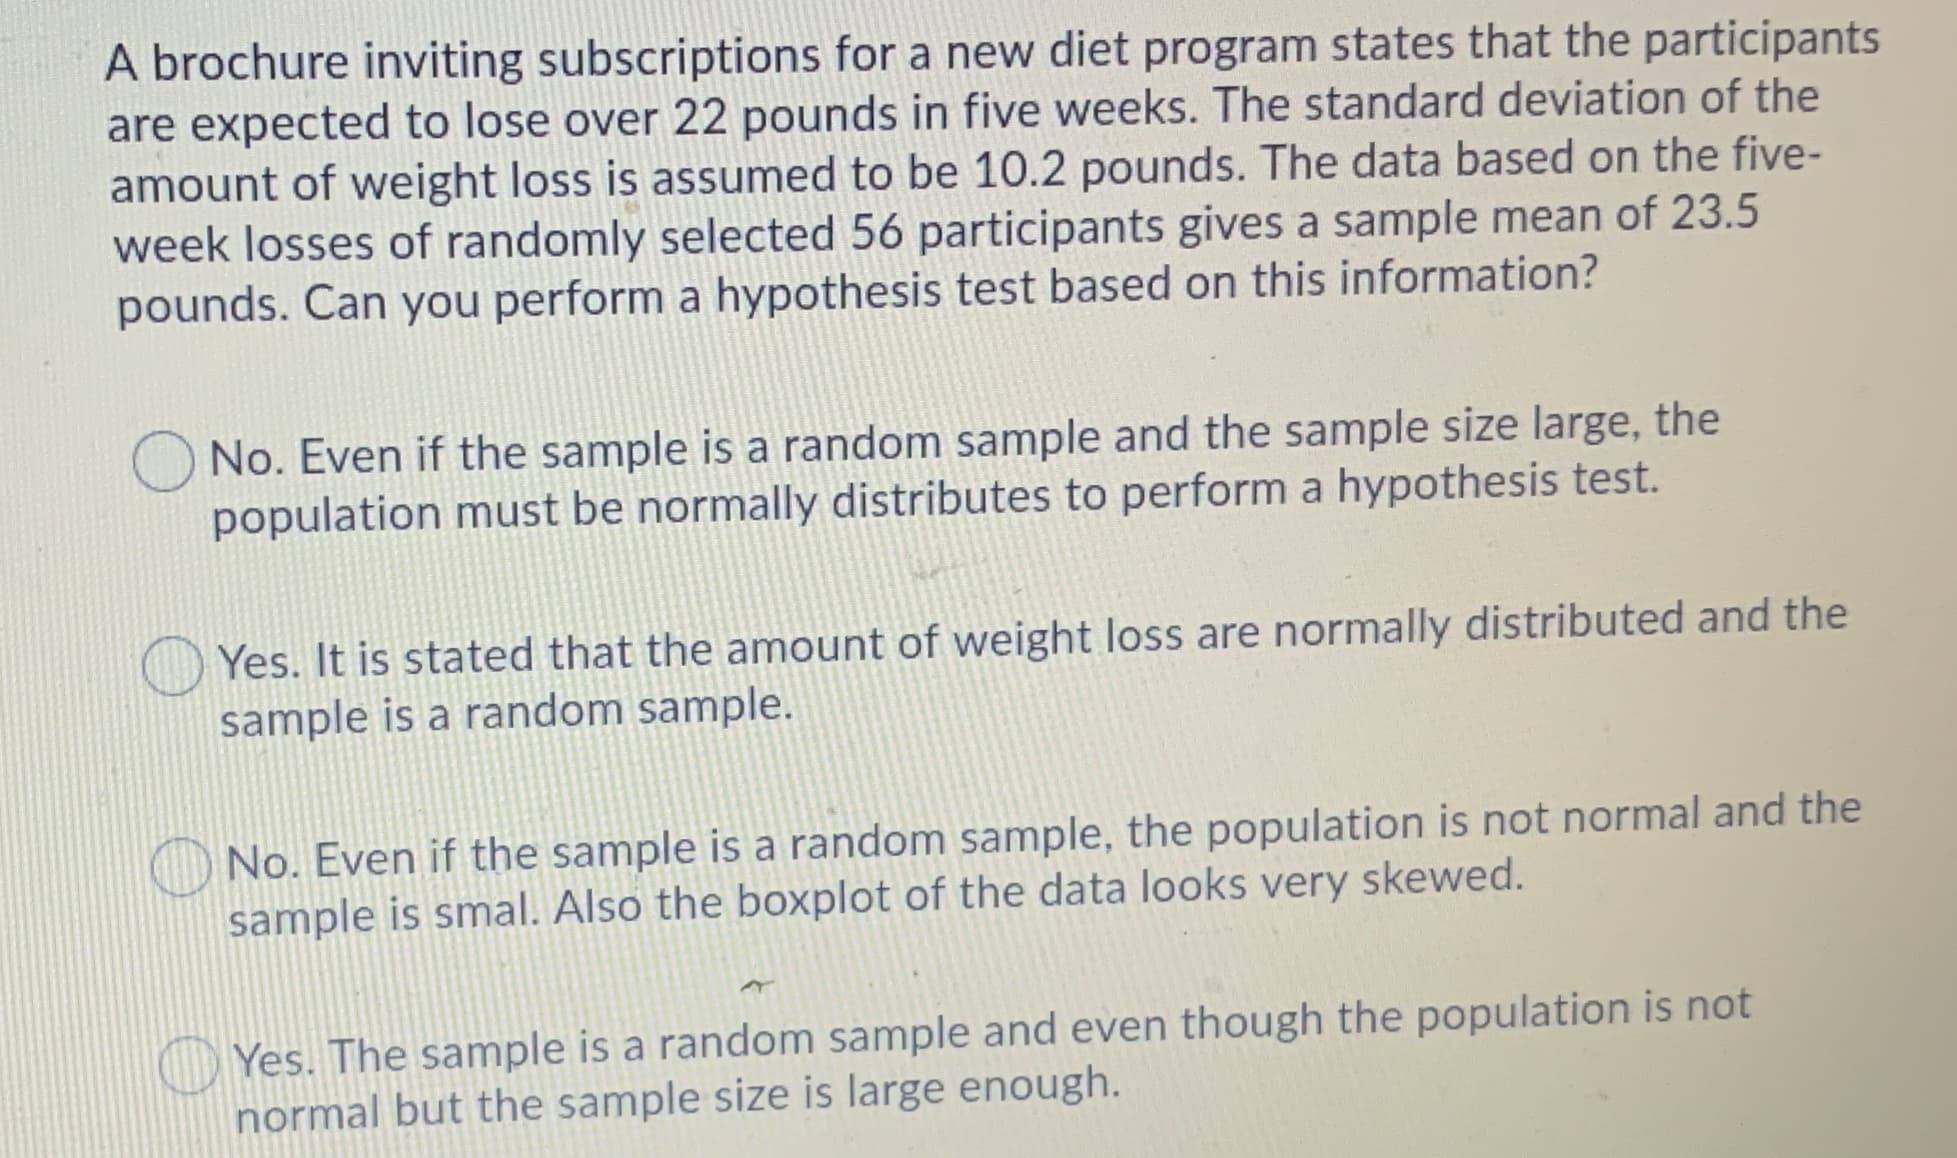 A brochure inviting subscriptions for a new diet program states that the participants
are expected to lose over 22 pounds in five weeks. The standard deviation of the
amount of weight loss is assumed to be 10.2 pounds. The data based on the five-
week losses of randomly selected 56 participants gives a sample mean of 23.5
pounds. Can you perform a hypothesis test based on this information?
O No. Even if the sample is a random sample and the sample size large, the
population must be normally distributes to perform a hypothesis test.
O Yes. It is stated that the amount of weight loss are normally distributed and the
sample is a random sample.
No. Even if the sample is a random sample, the population is not normal and the
sample is smal. Also the boxplot of the data looks very skewed.
O Yes. The sample is a random sample and even though the population is not
normal but the sample size is large enough.
